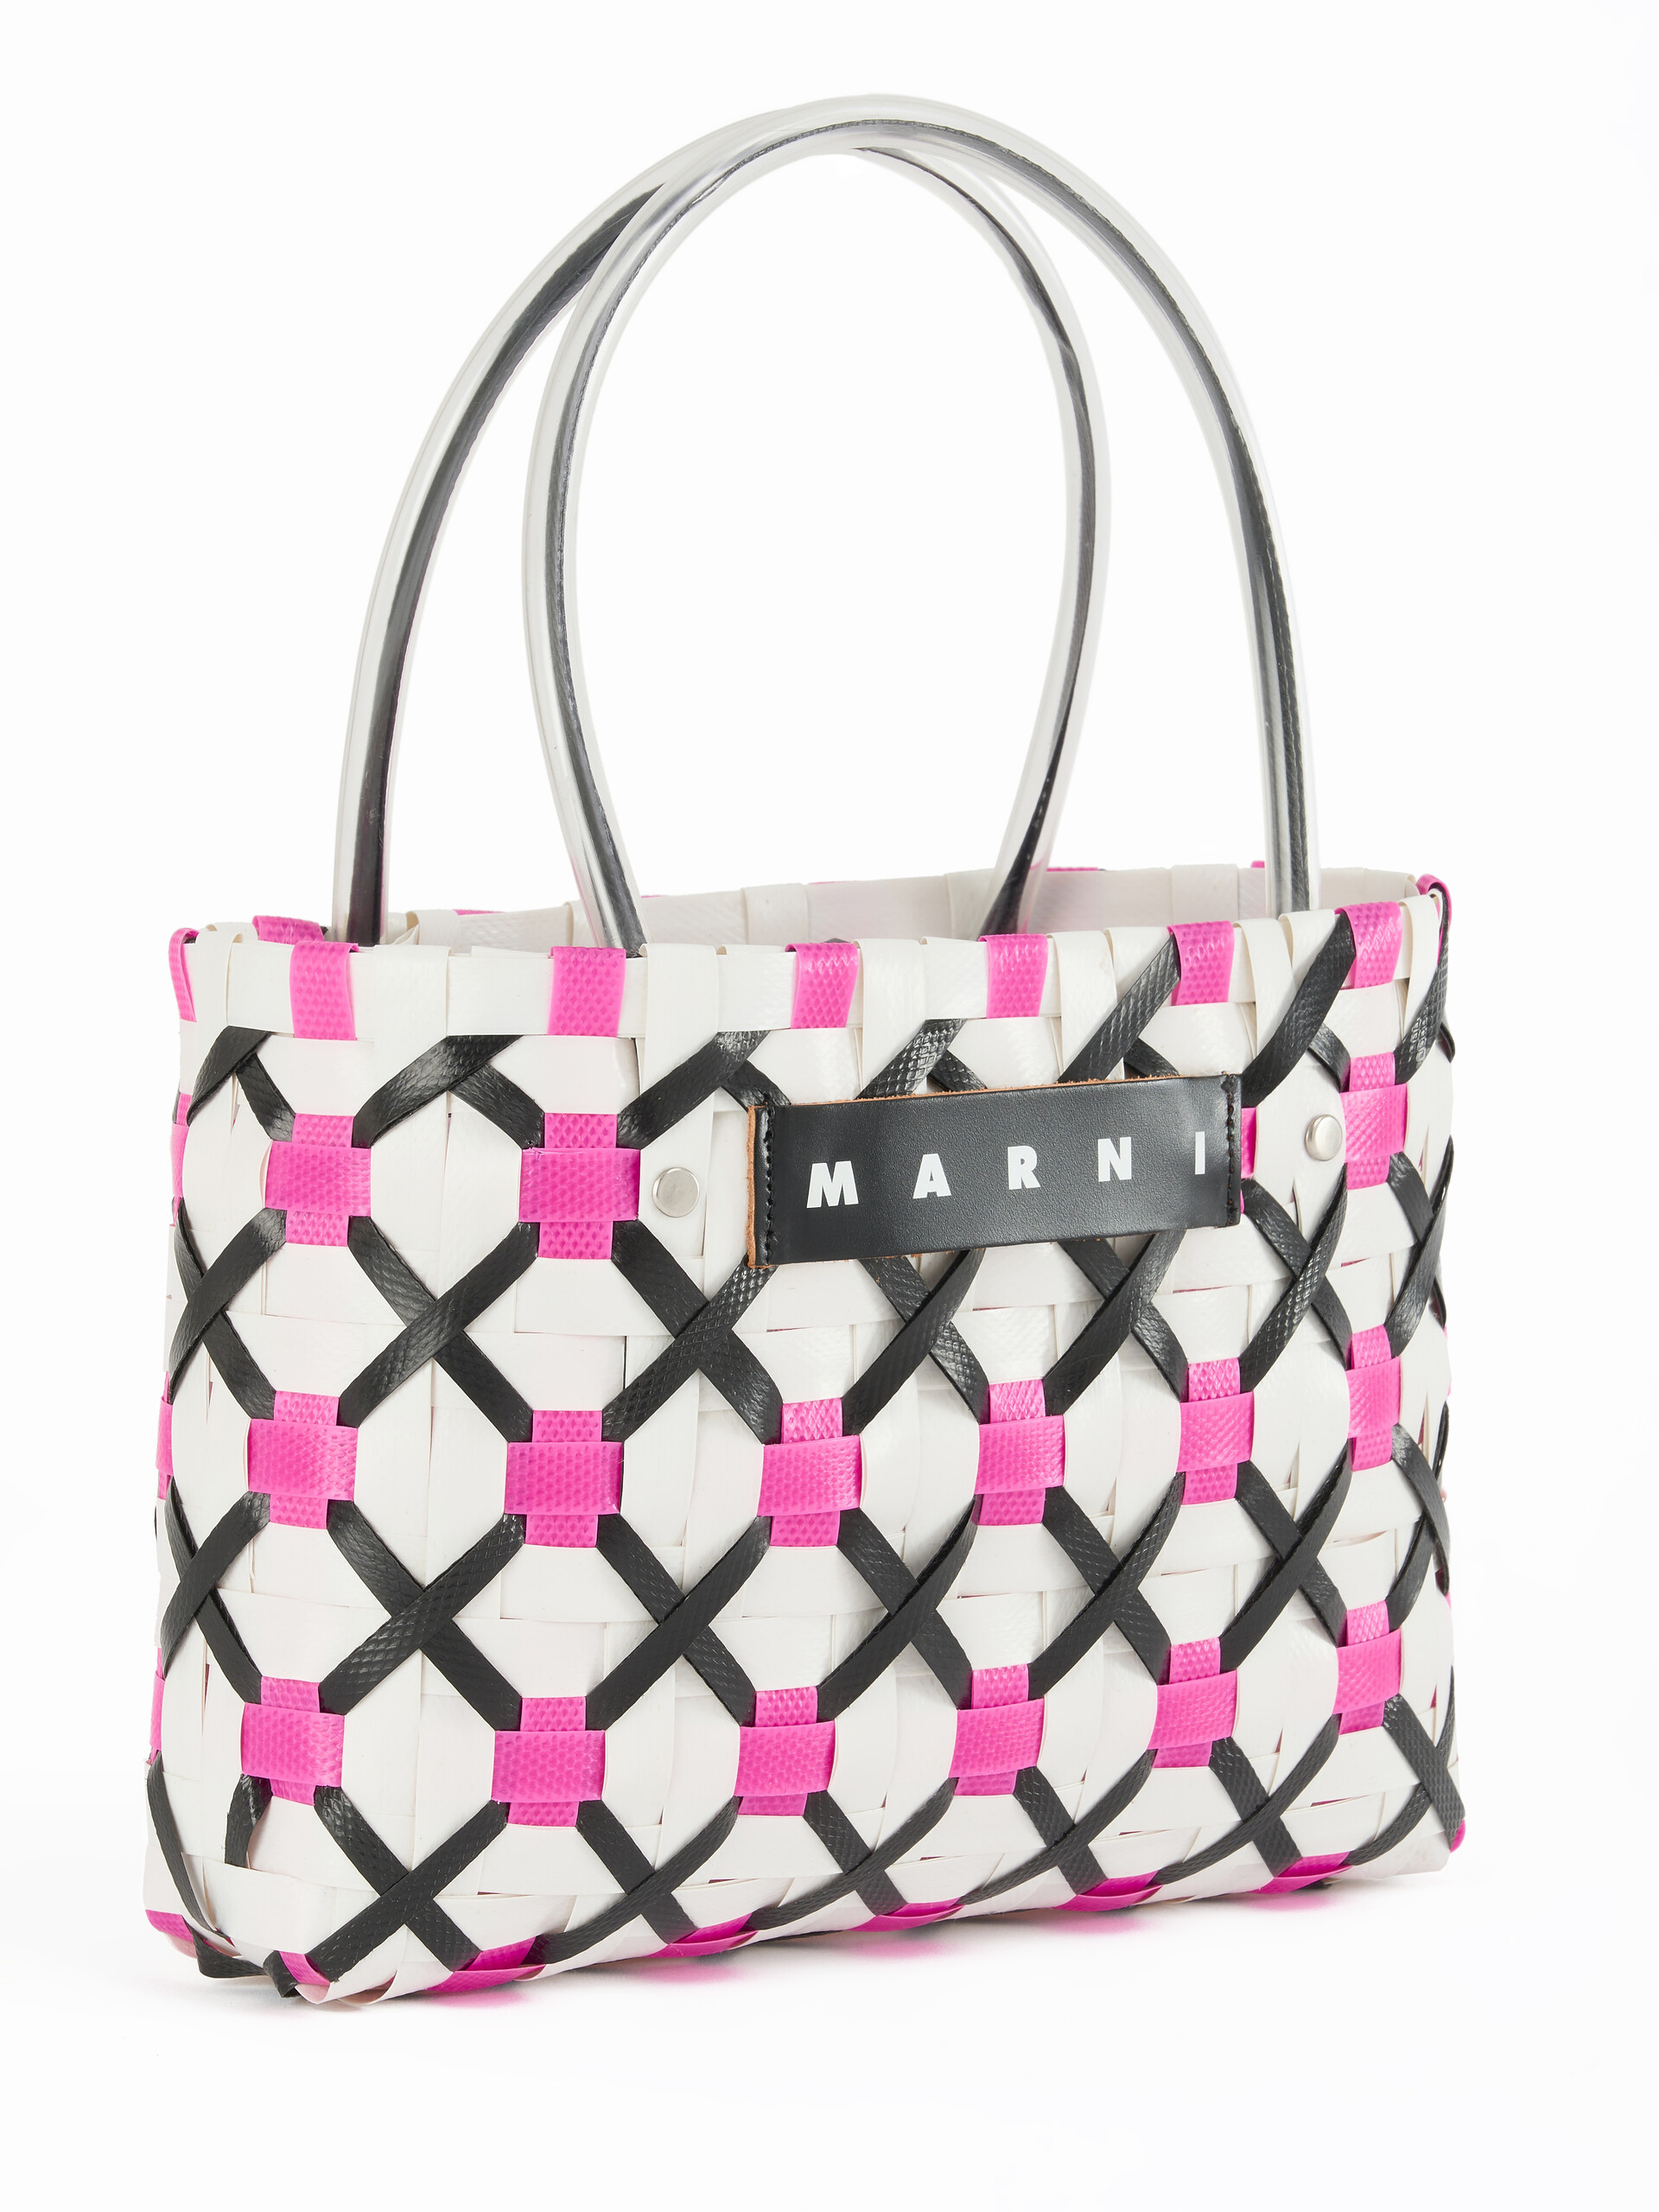 White and pink criss-cross MARNI MARKET tote bag